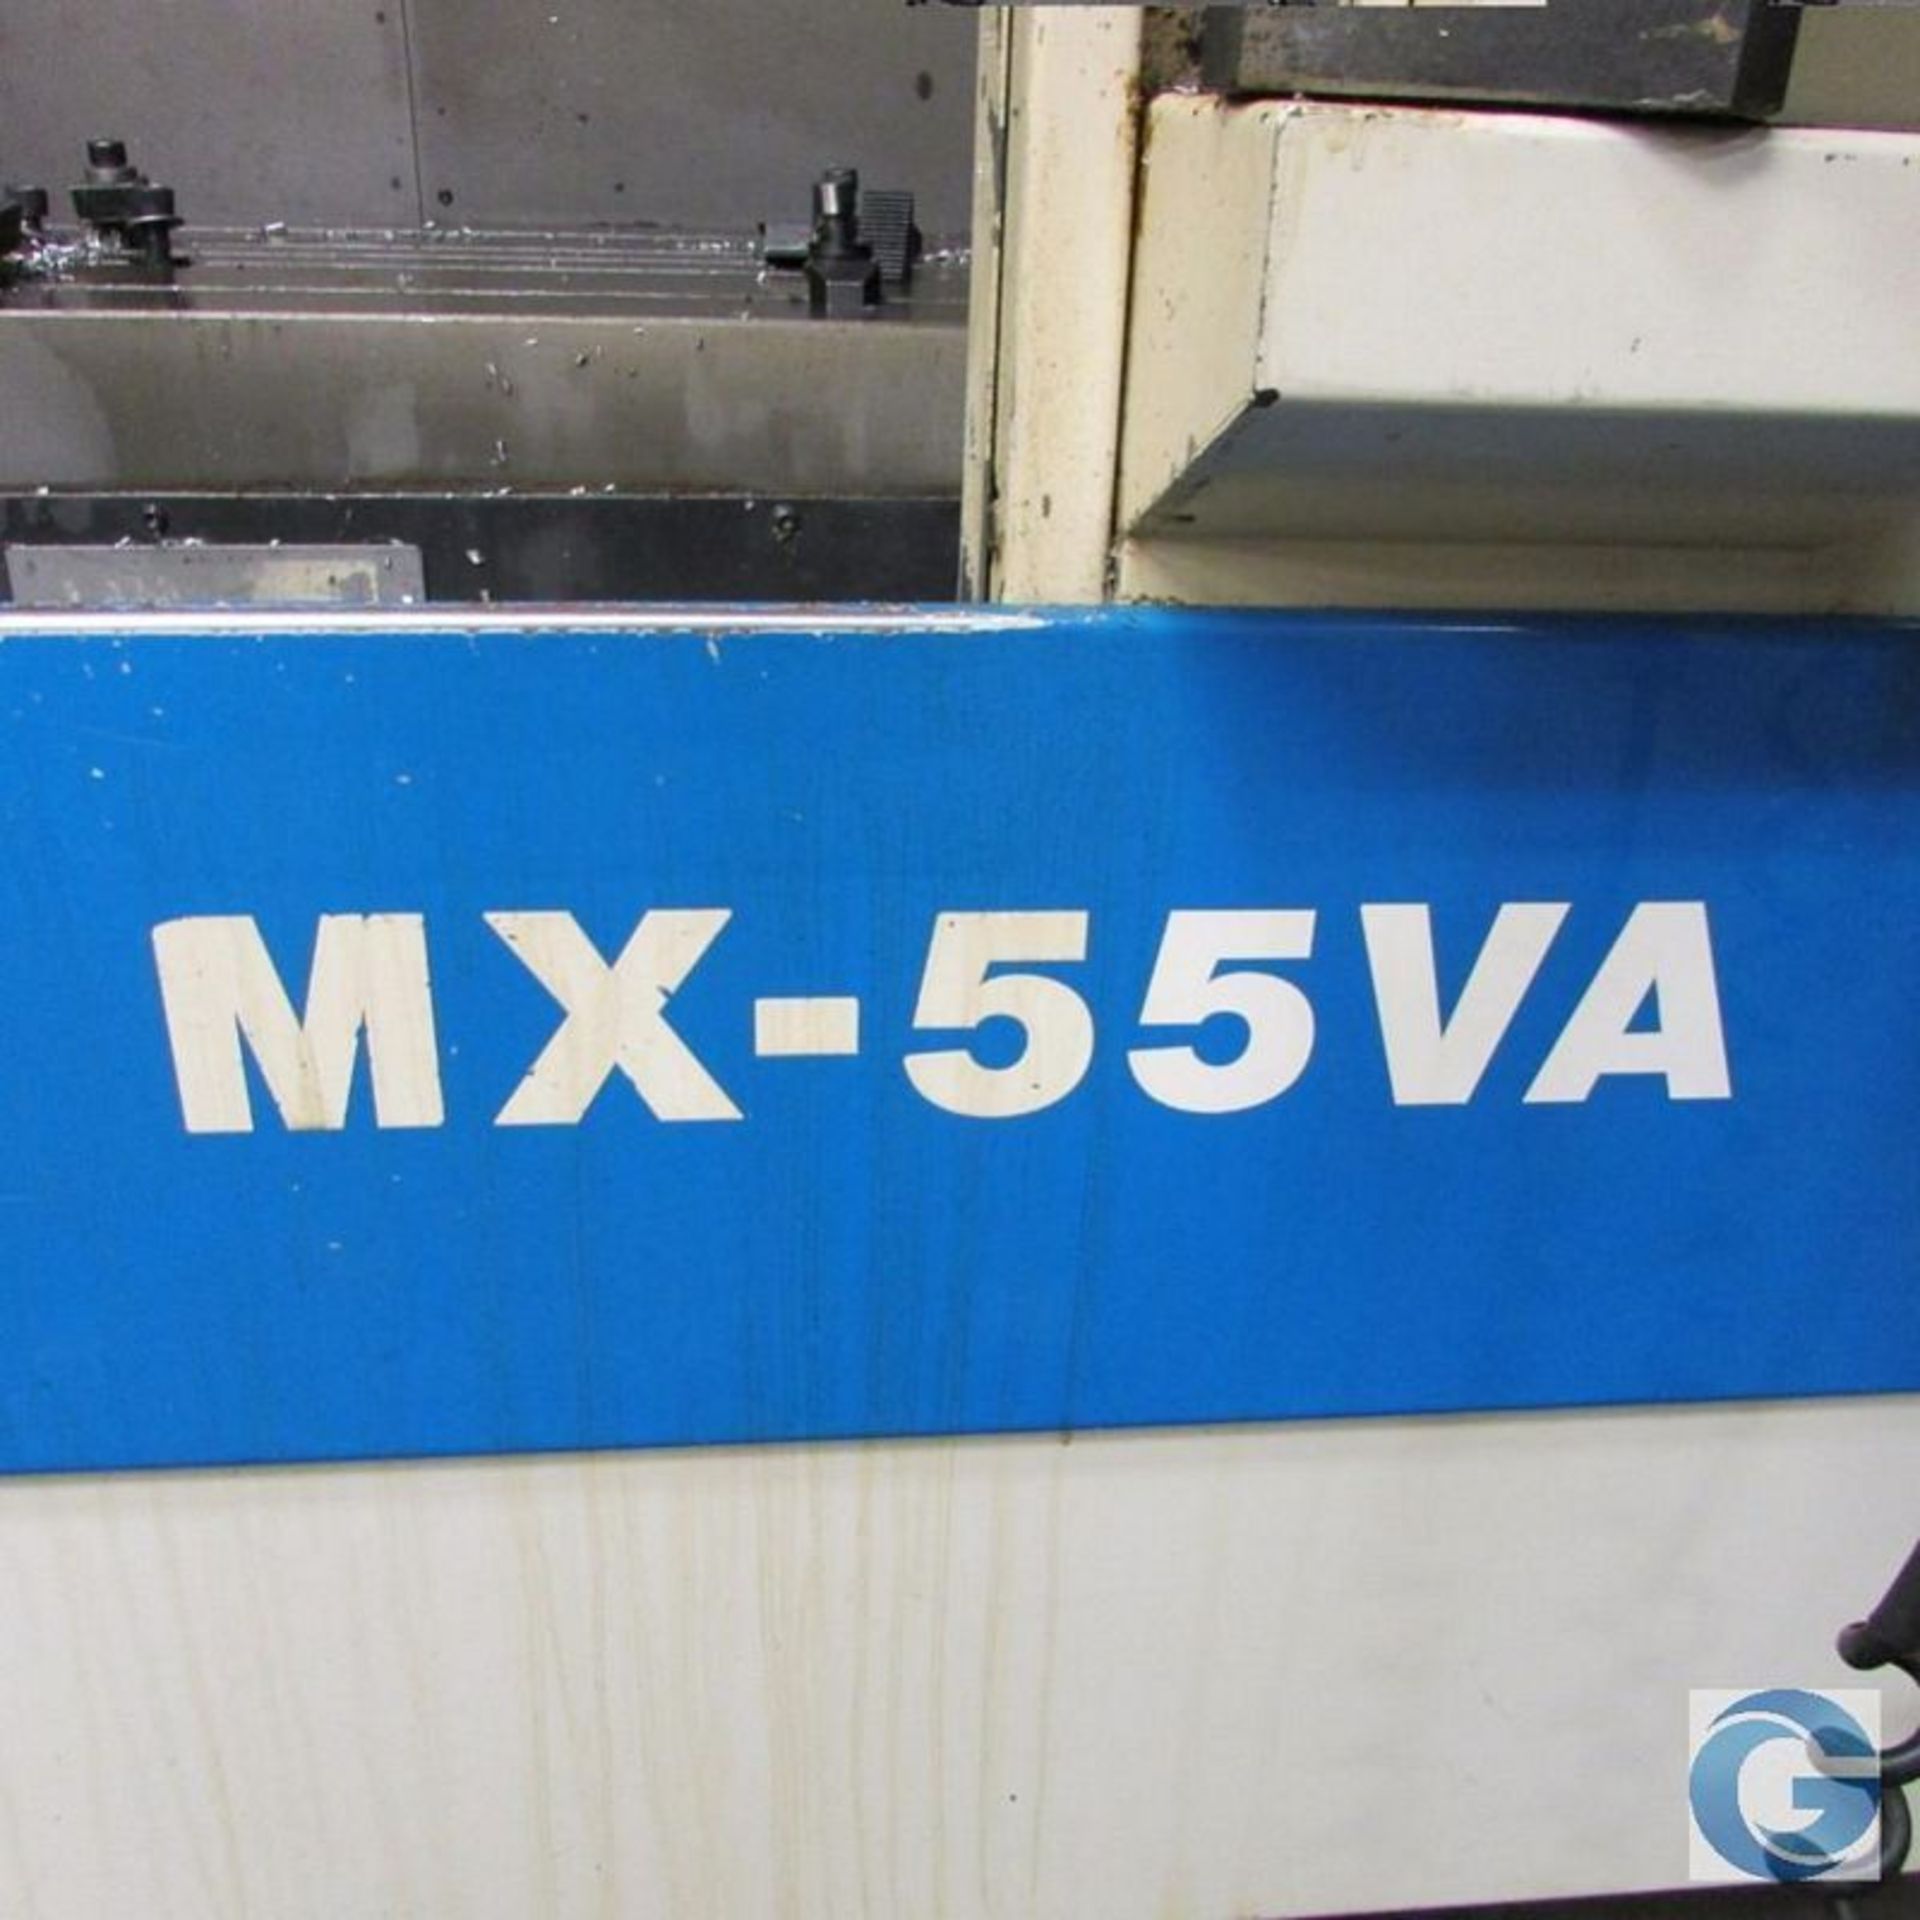 Okuma MX-55A 3-Axis CNC Vertical Machinig Center, S/N 0903-0172, New 1997 General Specifications, - Image 7 of 10